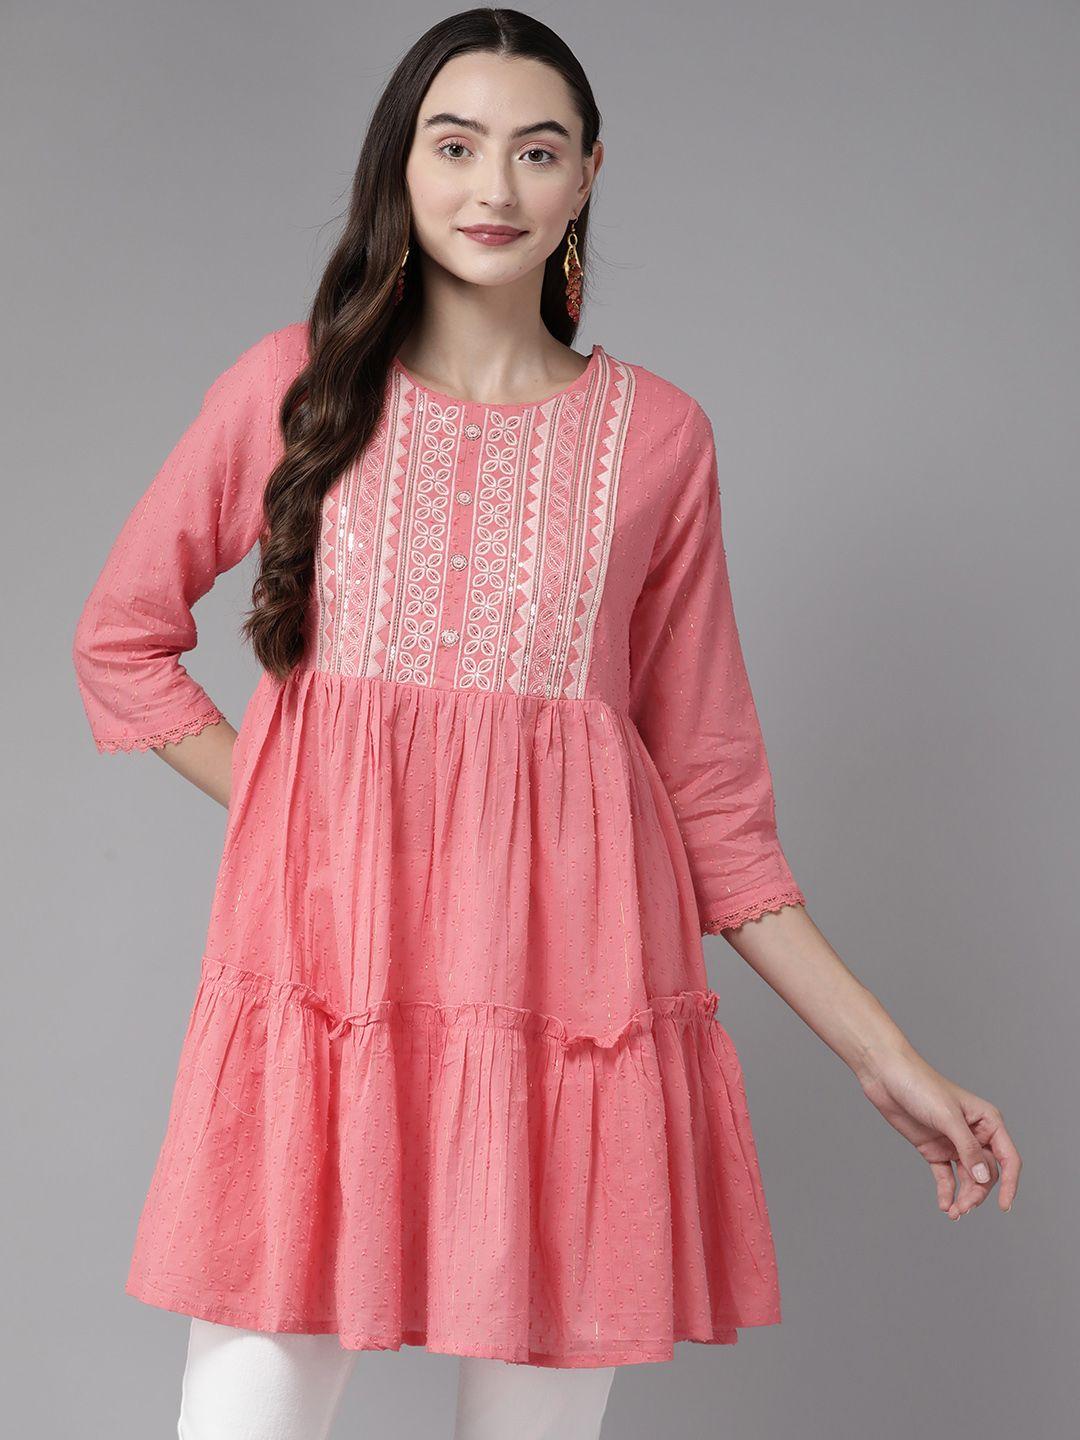 amirah-s-embroidered-embellished-cotton-ethnic-tunic